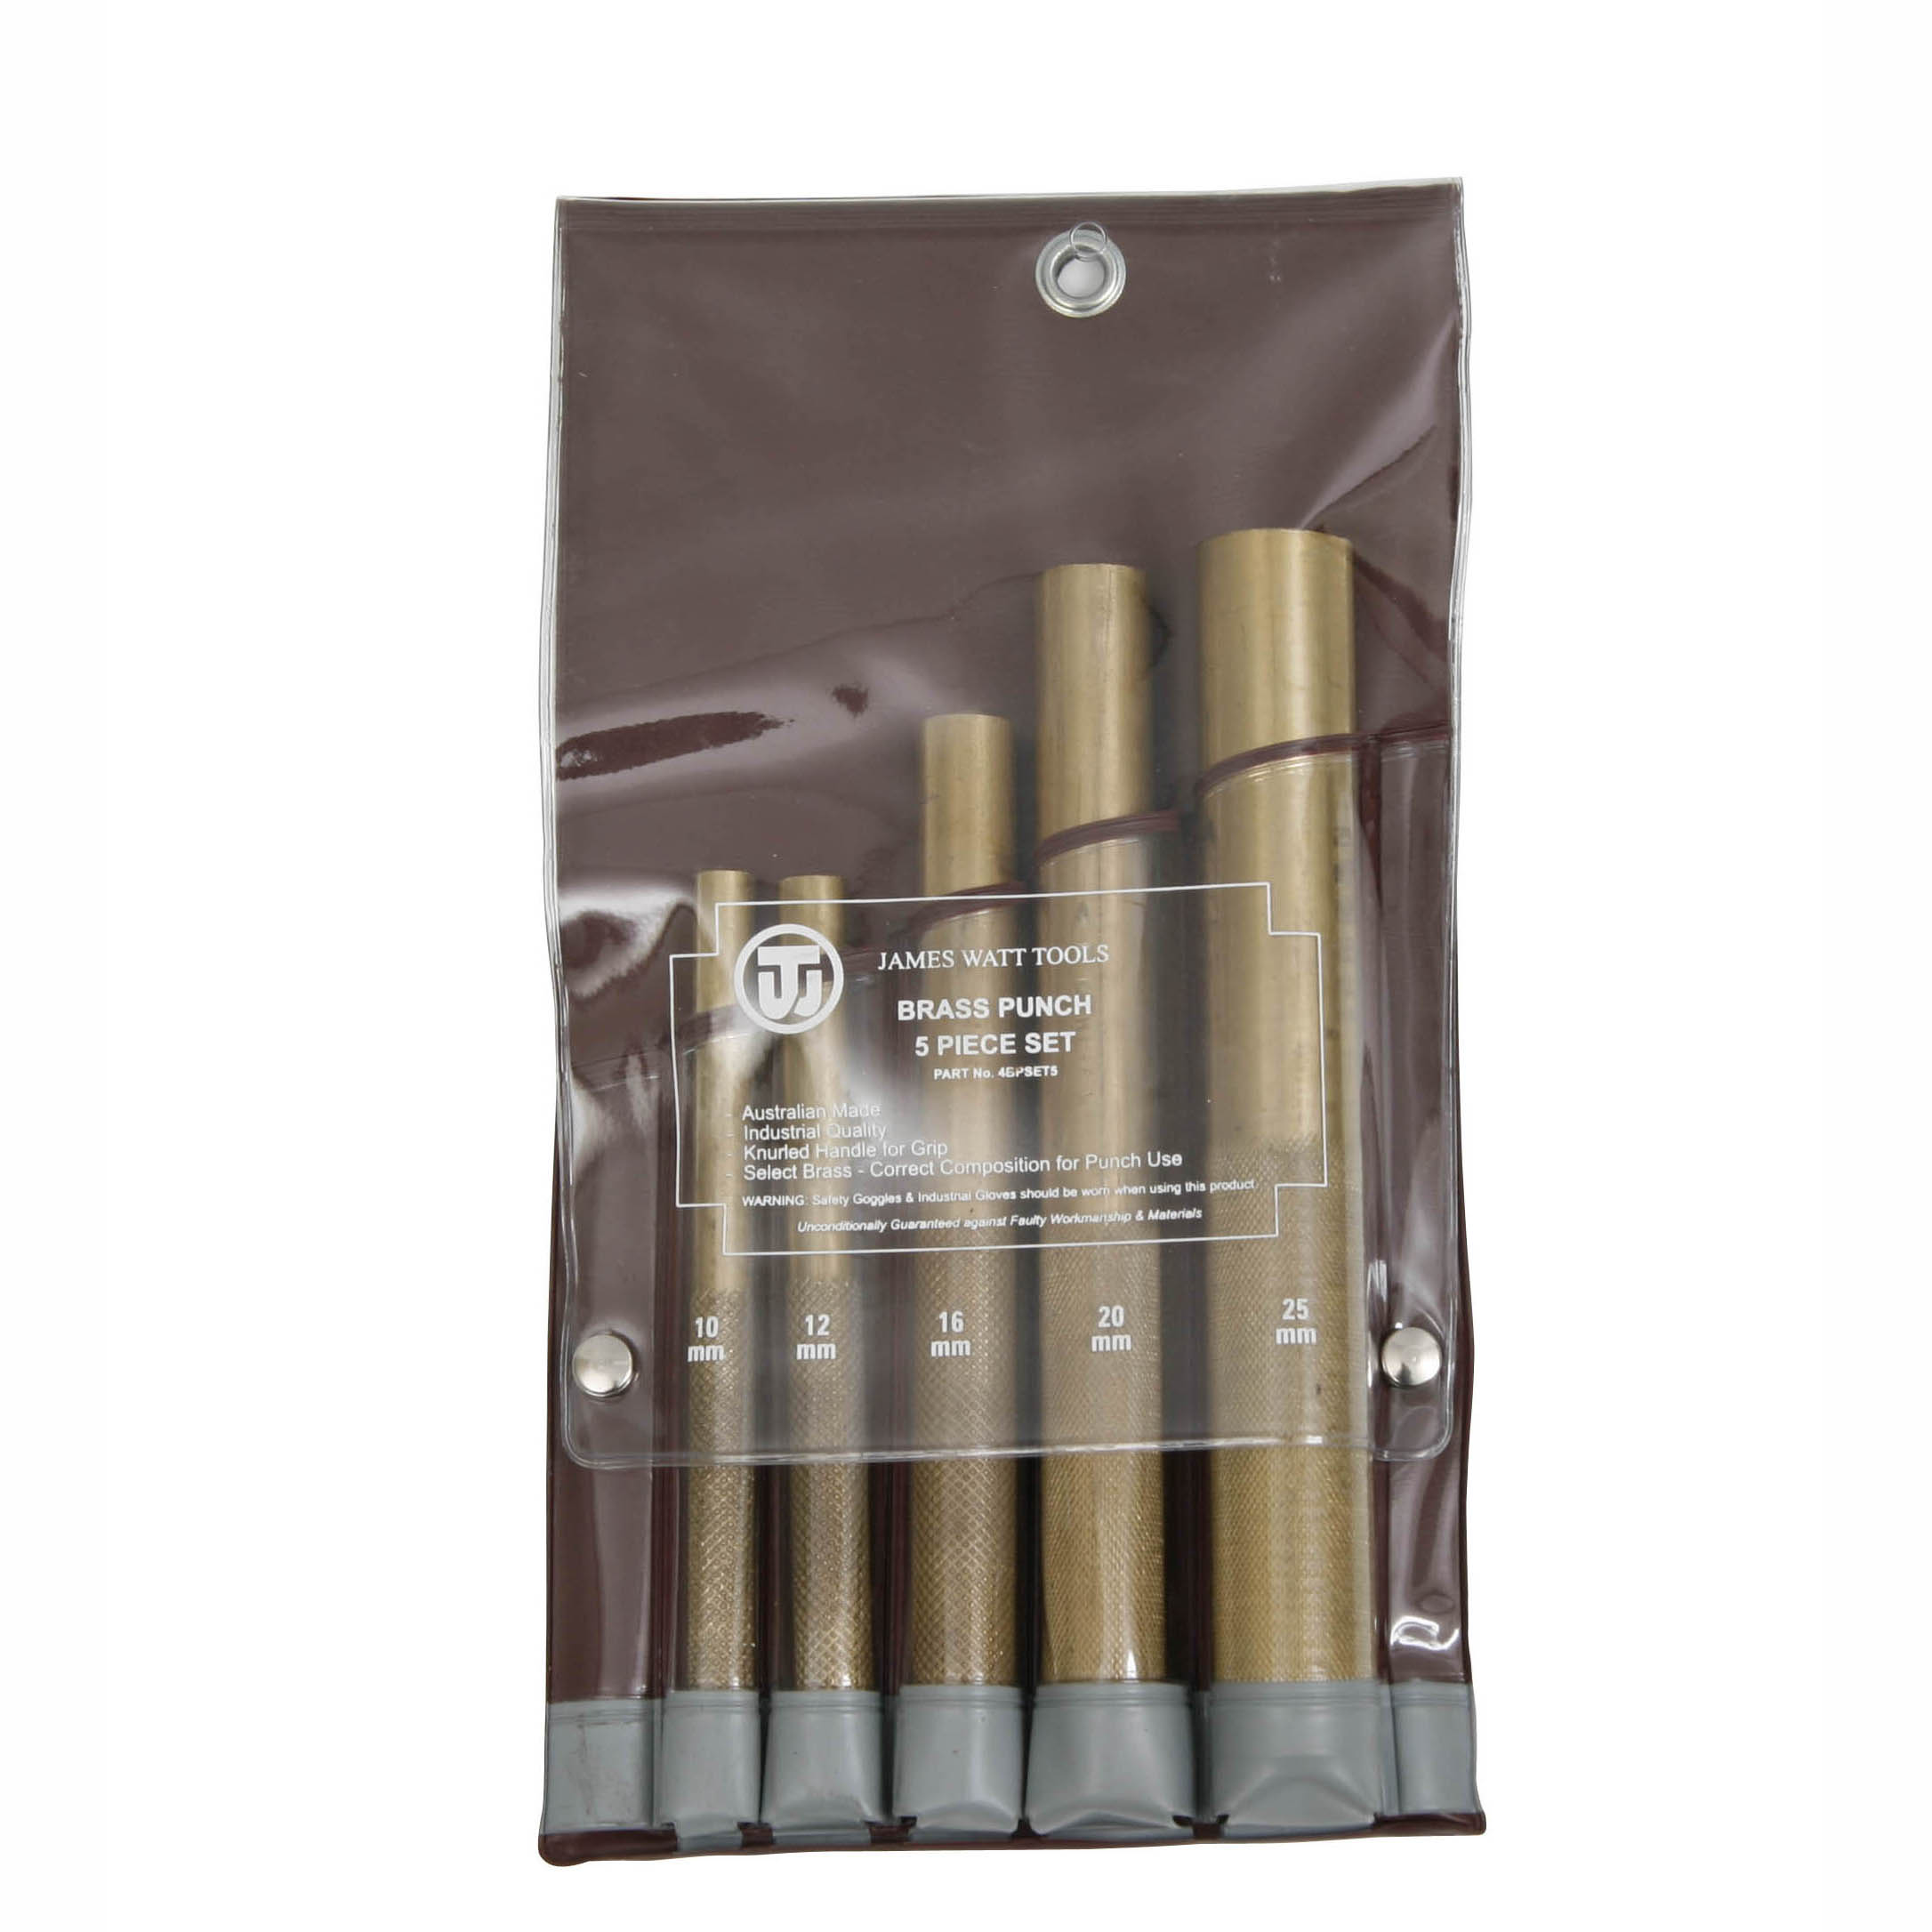 4BPSET5 Brass Punches 5 Piece Set - Image